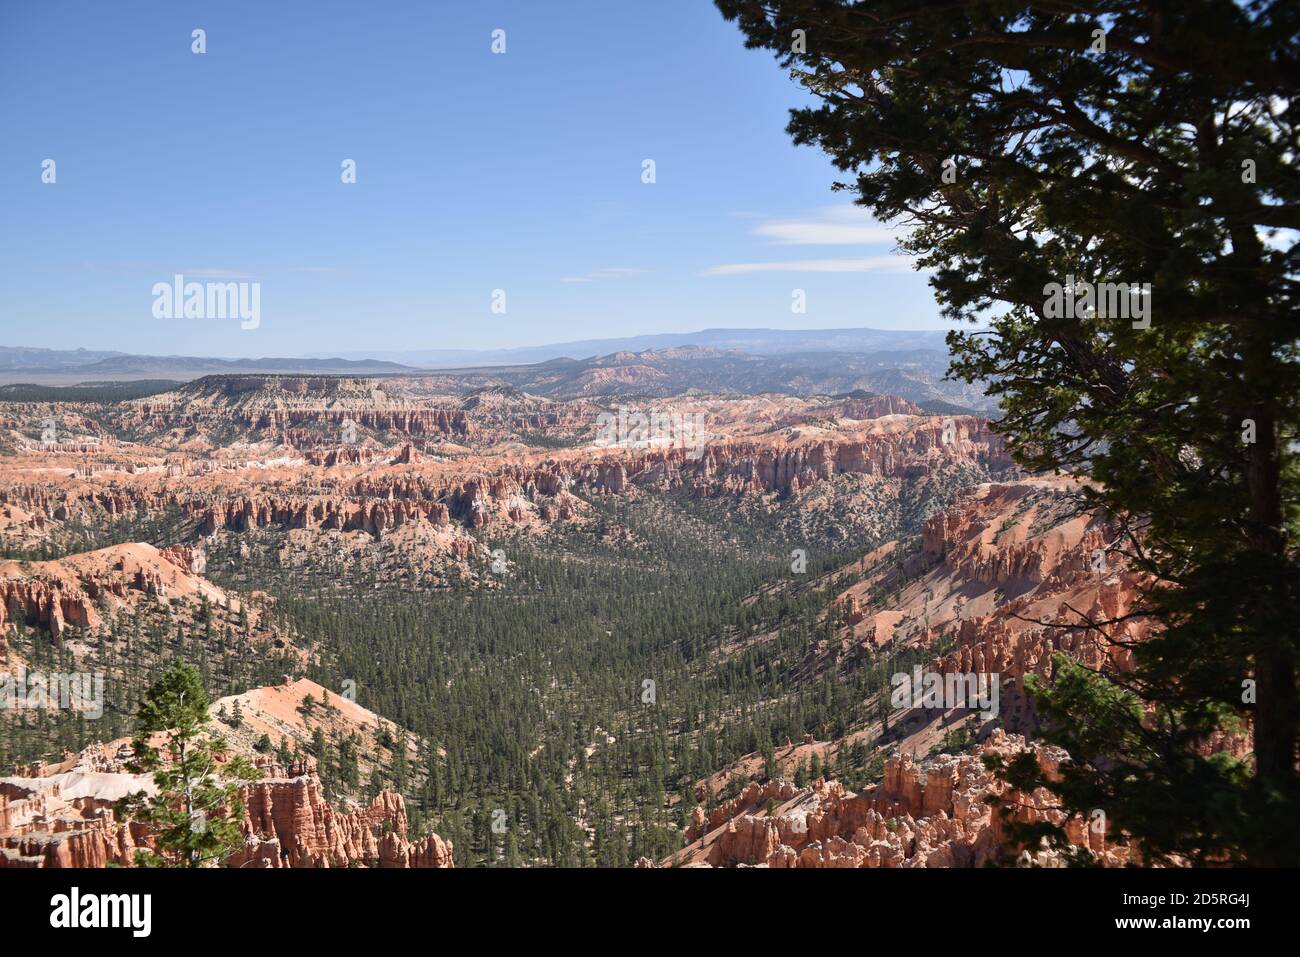 Bryce Canyon National Park, UT., U.S.A. 8/15/2020.  Bryce Canyon viewpoints: Farview, Fairyland, Sunrise & Sunset, Inspiration & Bryce point. Stock Photo